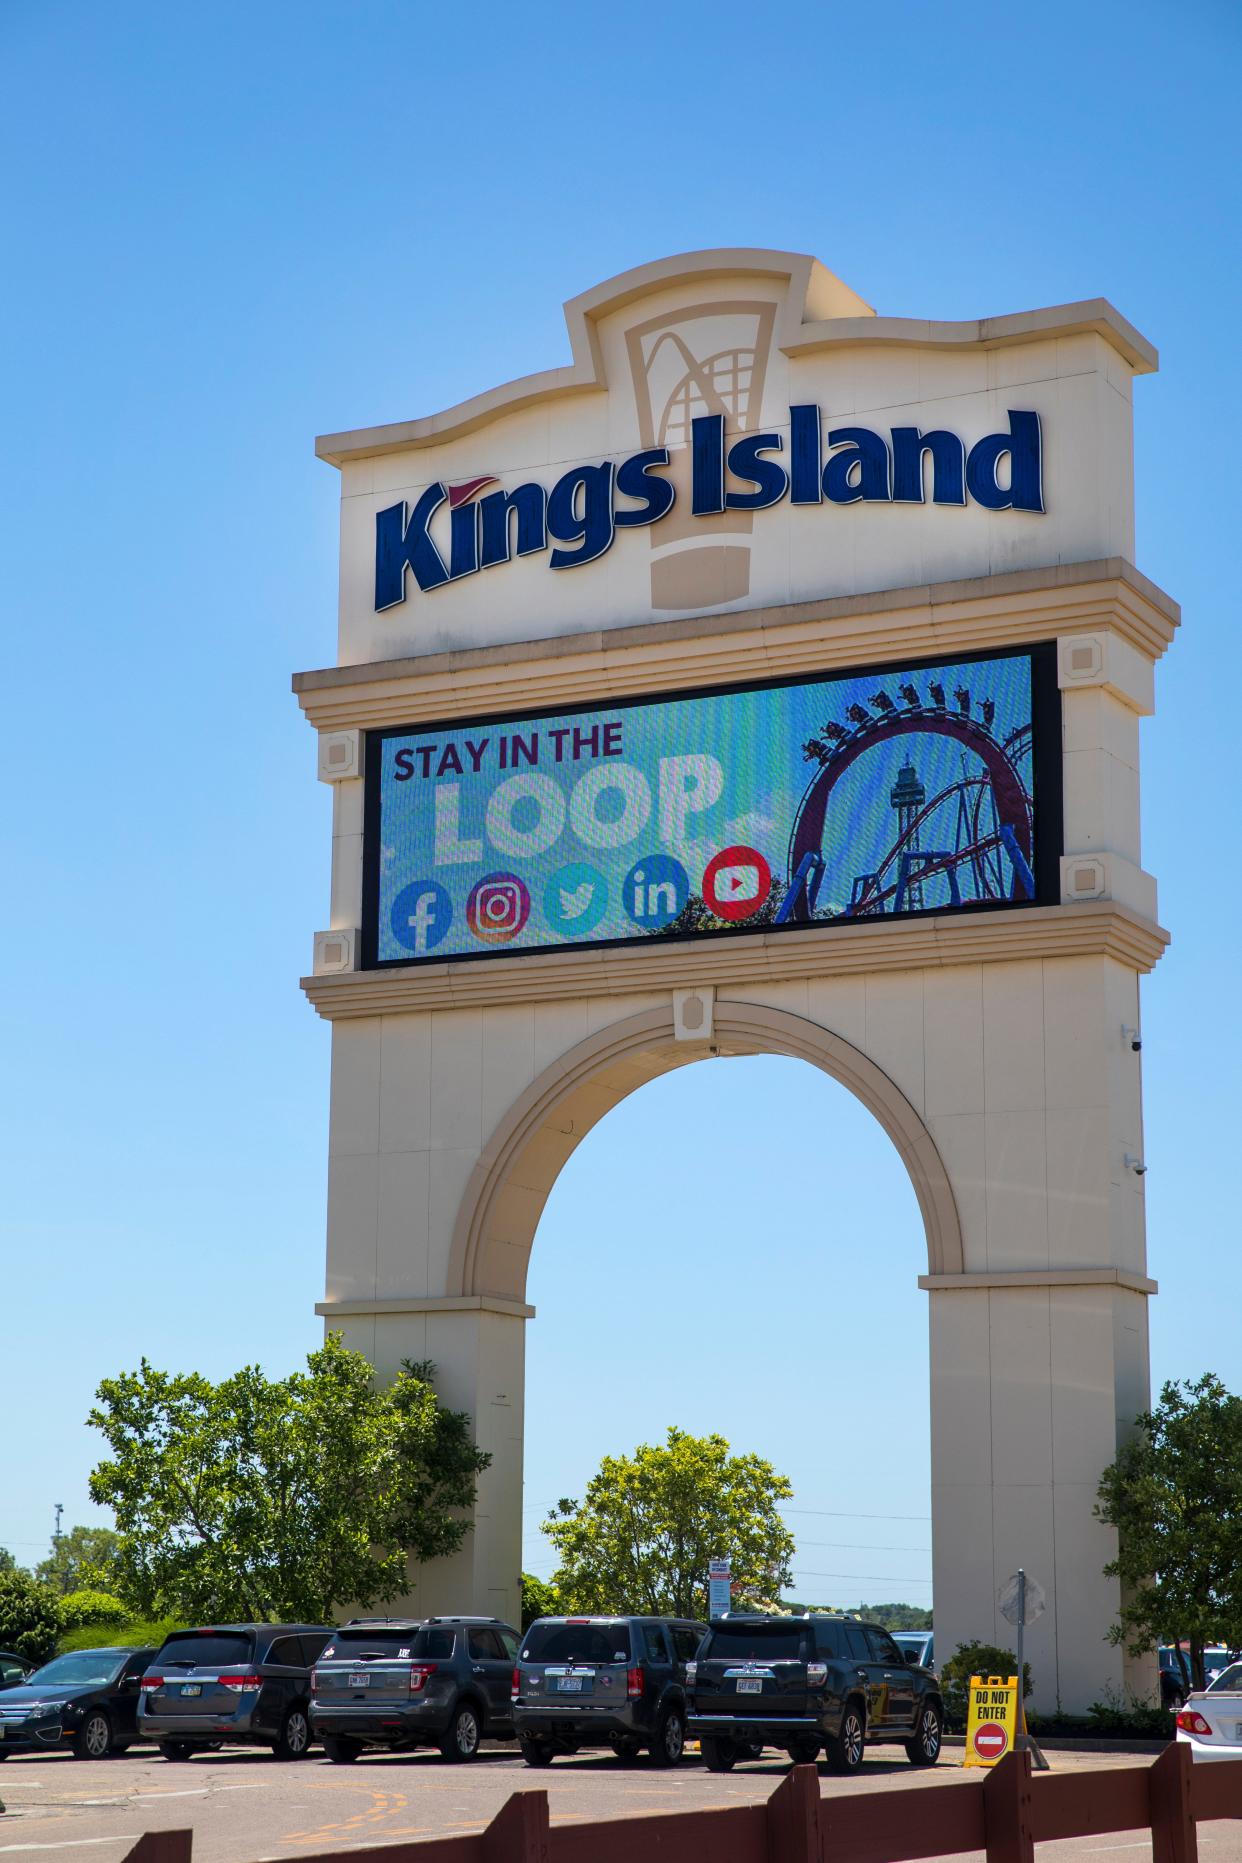 Kings Island announced Wednesday that Adventure Port, a new themed area, will open for the 2023 season. It will feature improvements to existing attractions and two new rides.